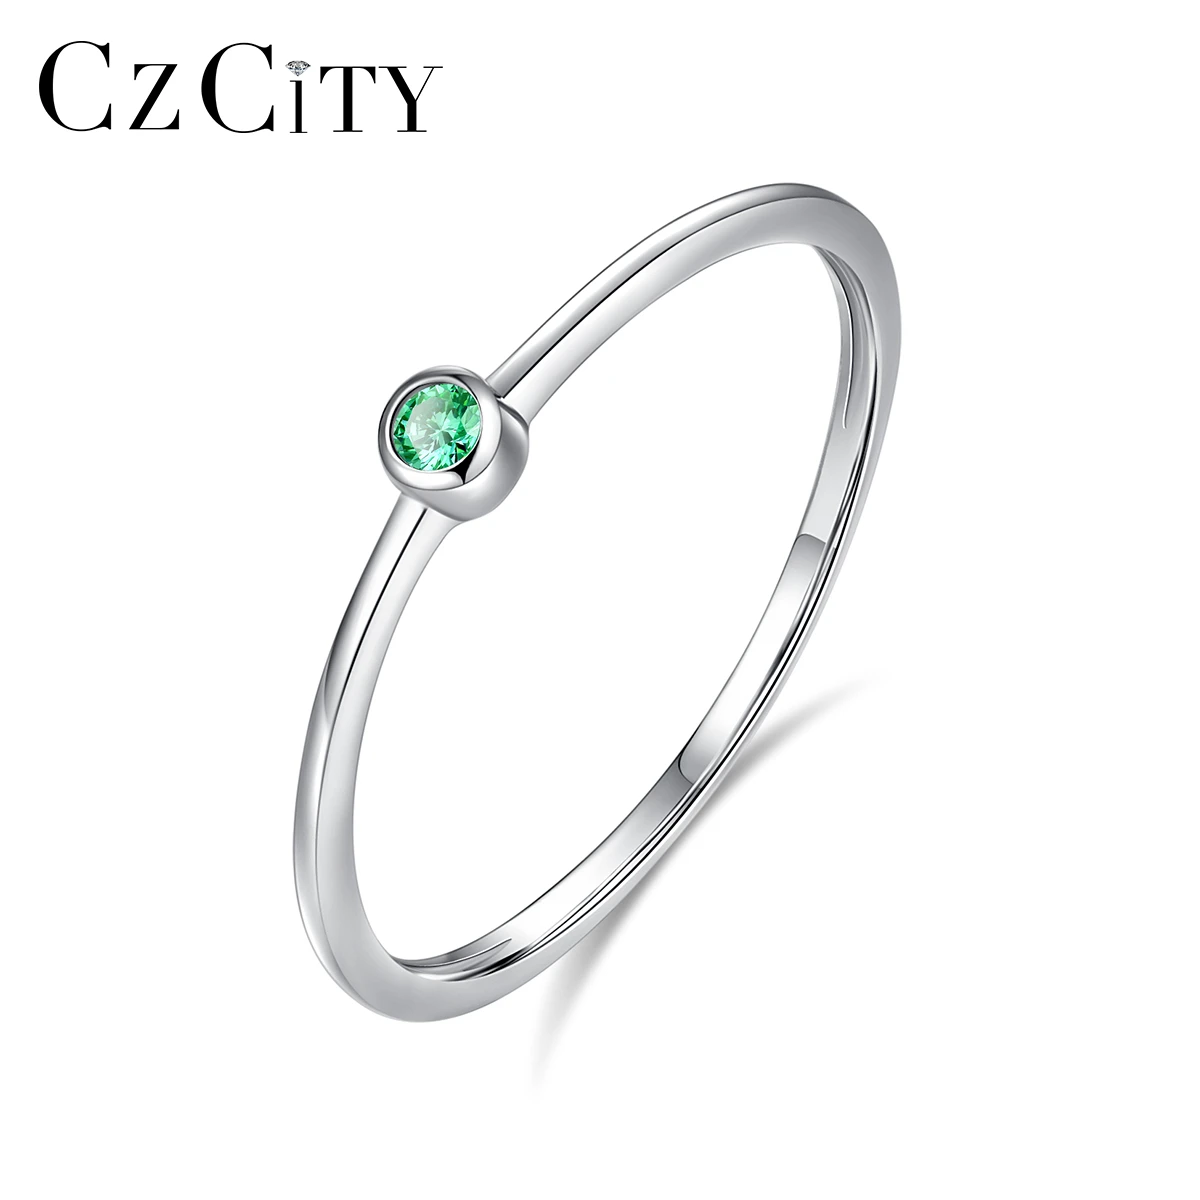 CZCITY Small Pure 925 Silver Sterling Rings for Women 2020 Three Colors Tiny Crystals Fashion Jewelry Dating Gifts SR20052901